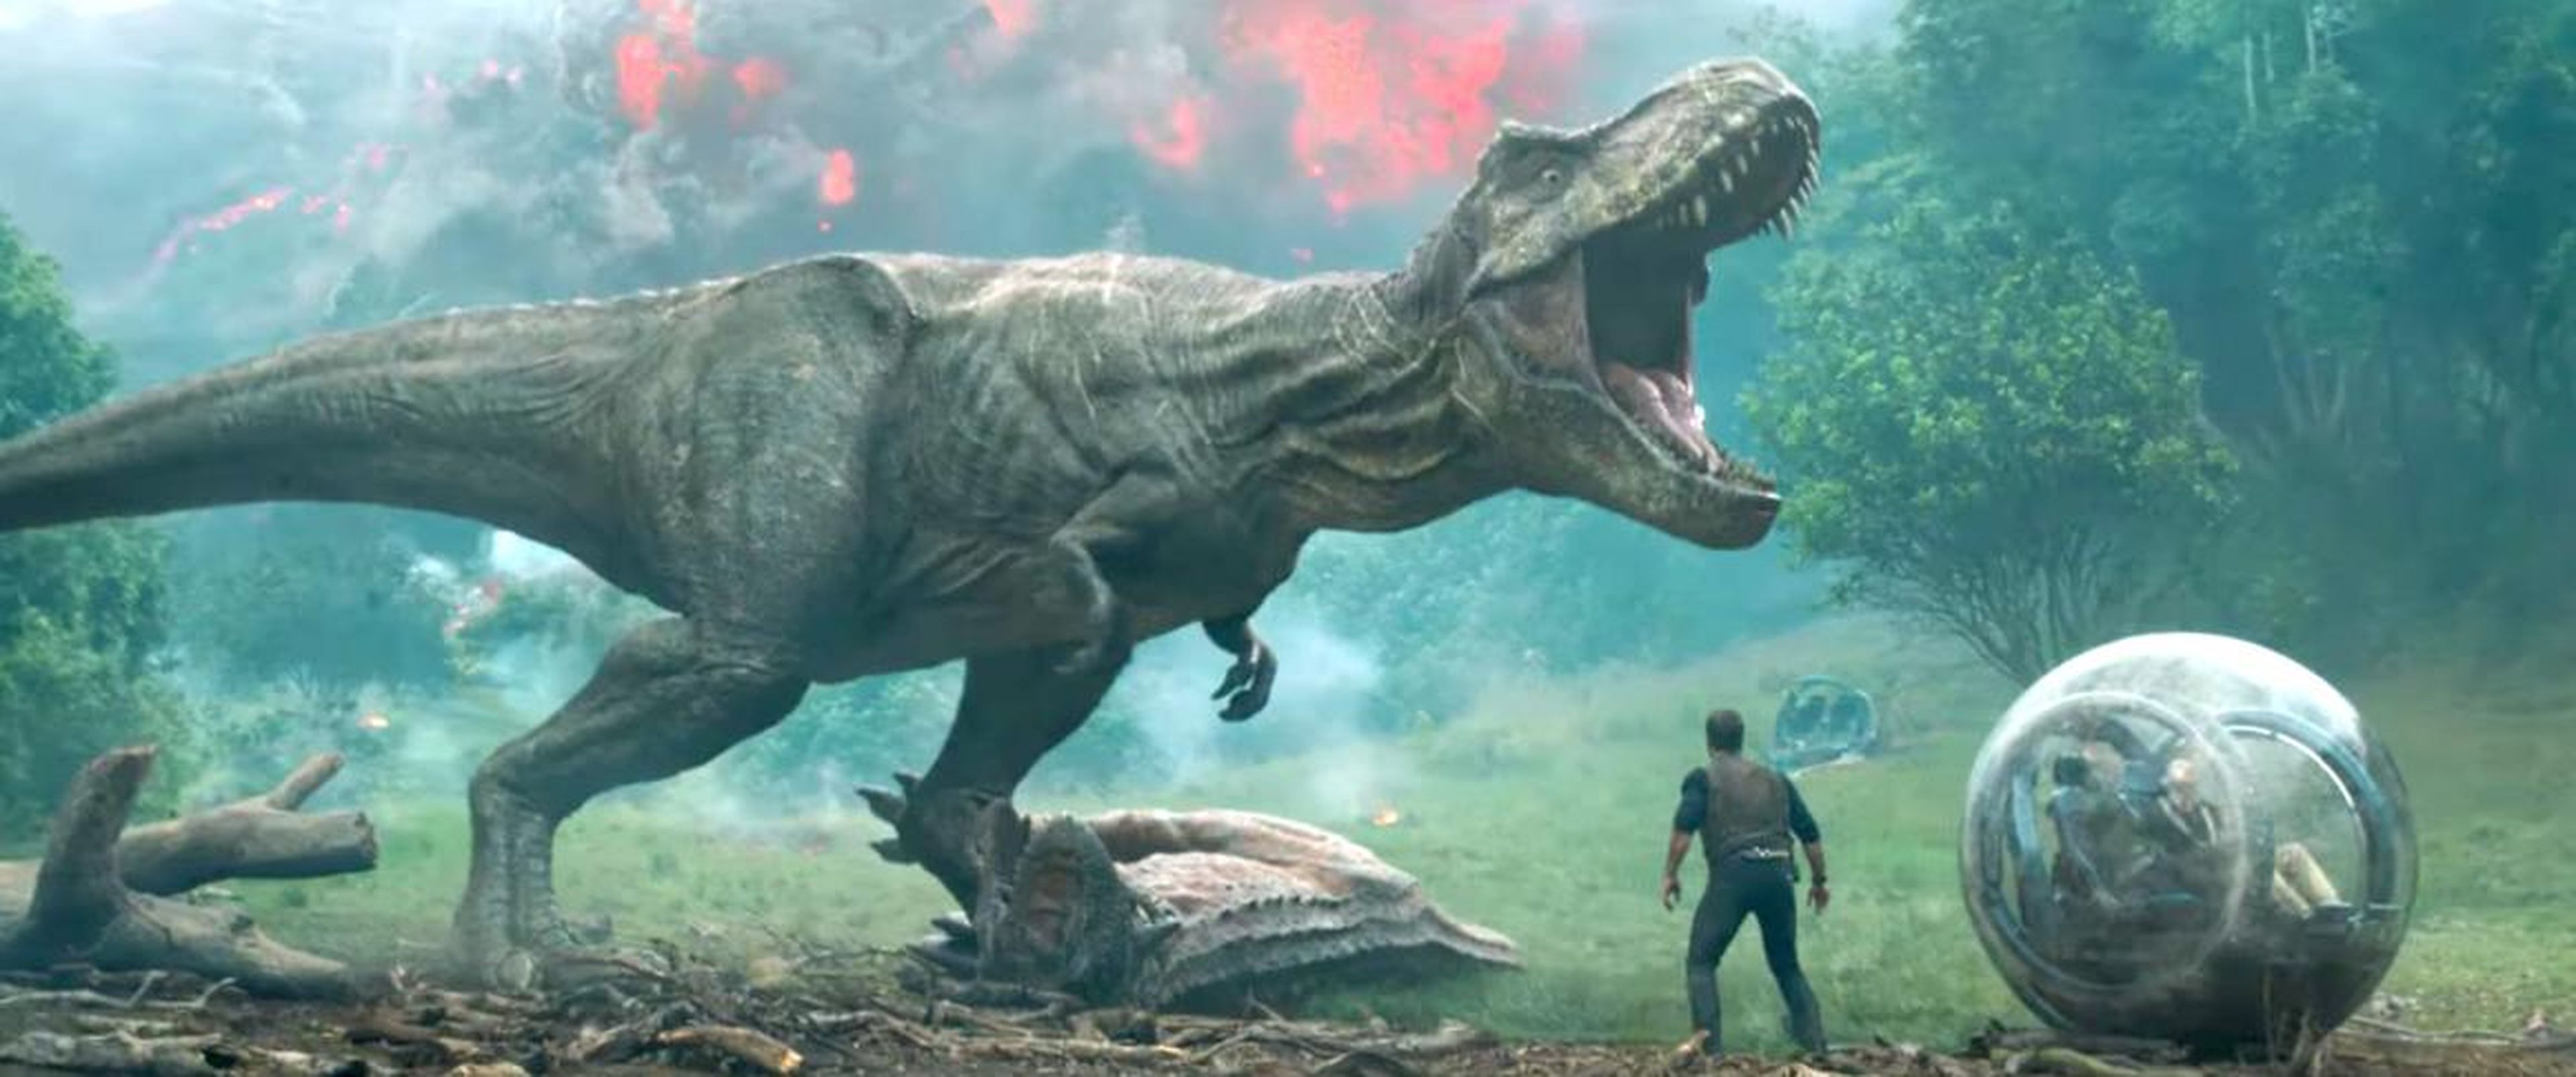 "'Fallen Kingdom' considers the idea of letting go, making it a more thoughtful and interesting film than its immediate predecessor. Having Bayona behind the wheel, rather than 'Jurassic World' director Colin Trevorrow (who has a